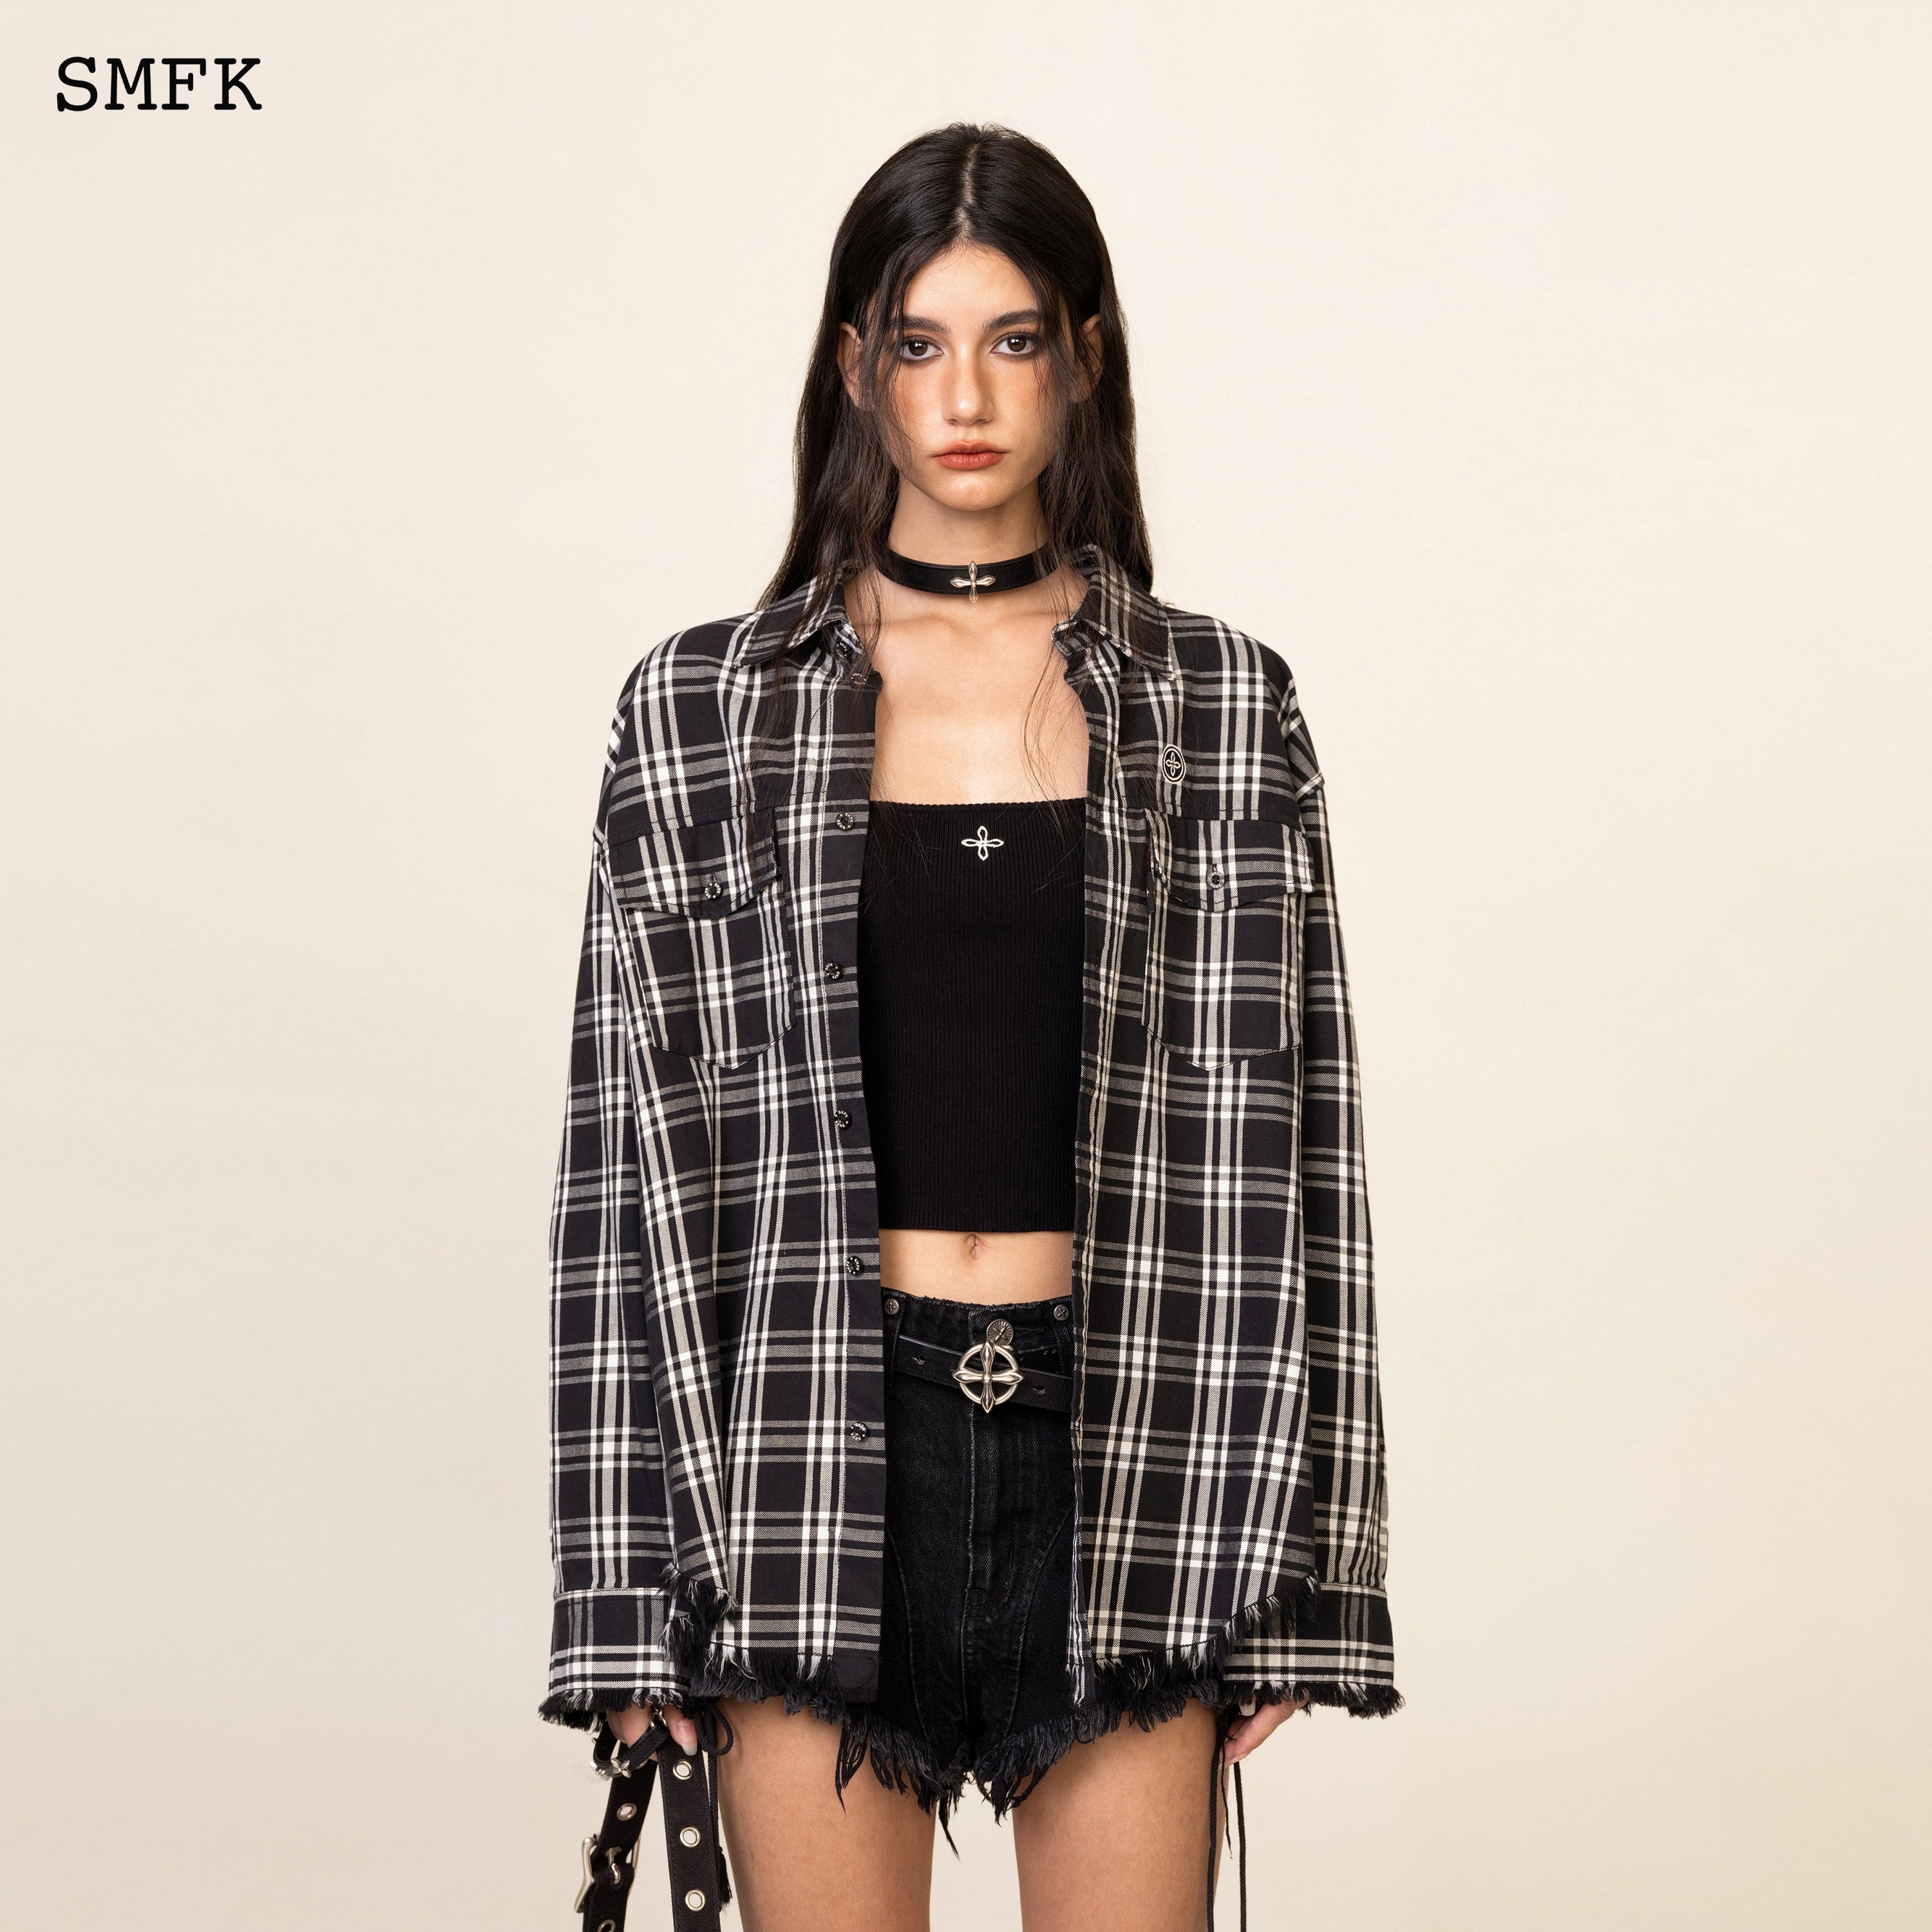 Compass Black Plaid Workwear Style Shirt - SMFK Official